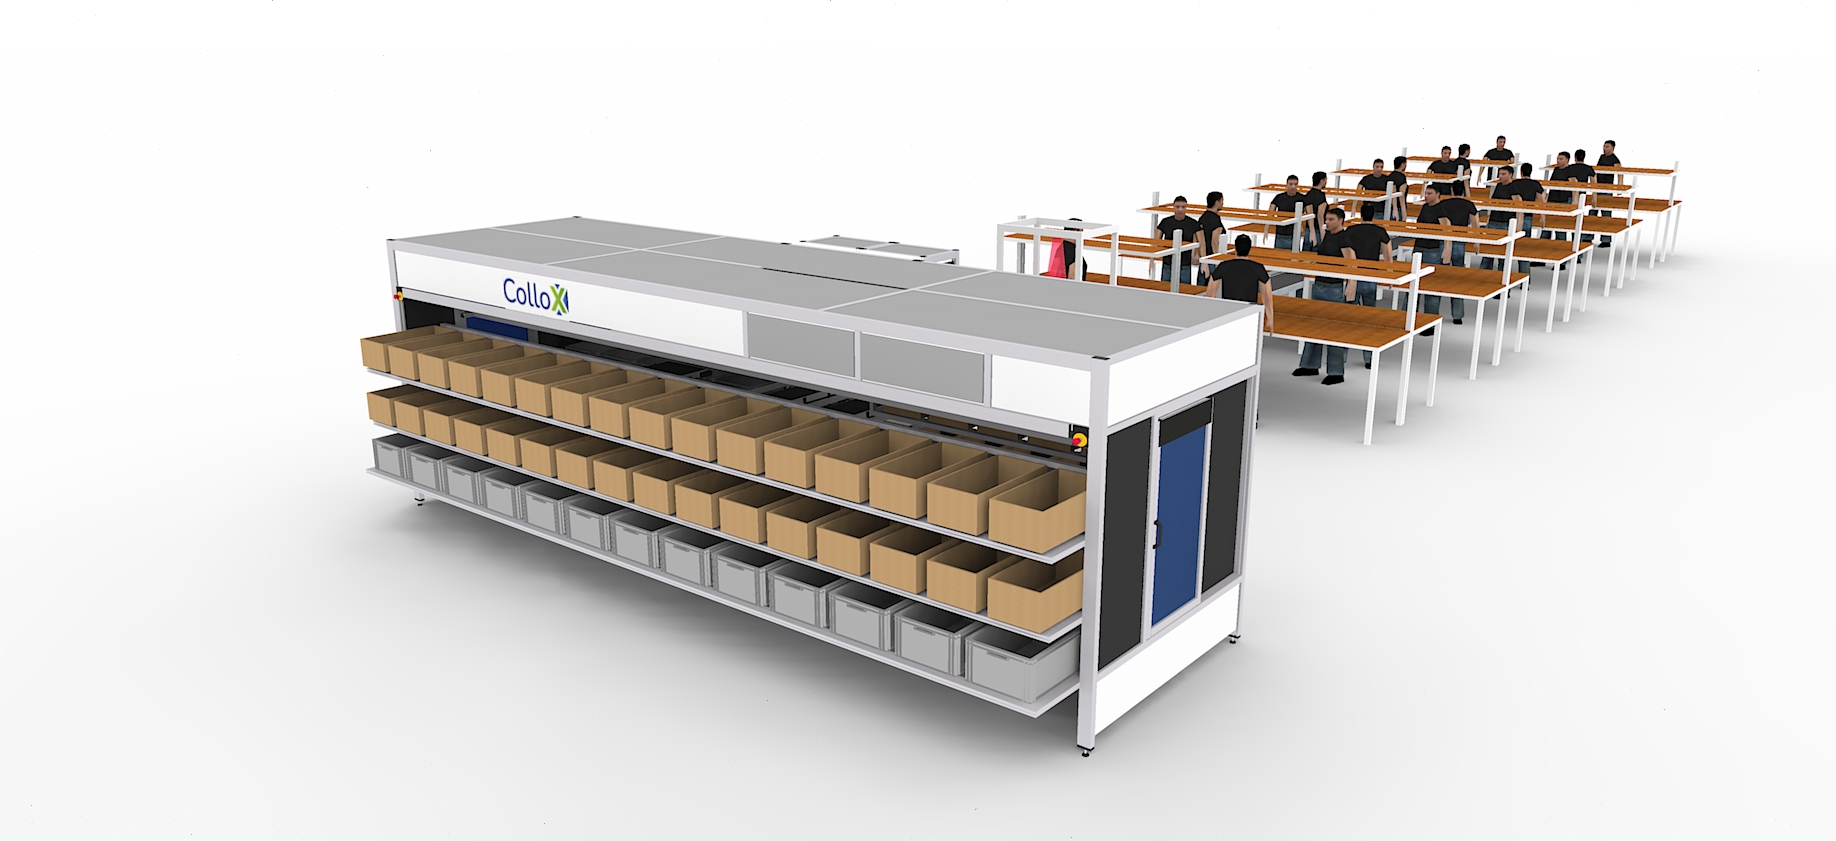 Image of MicroSorter totes used in a returning sorting system, designed for efficient logistics management.